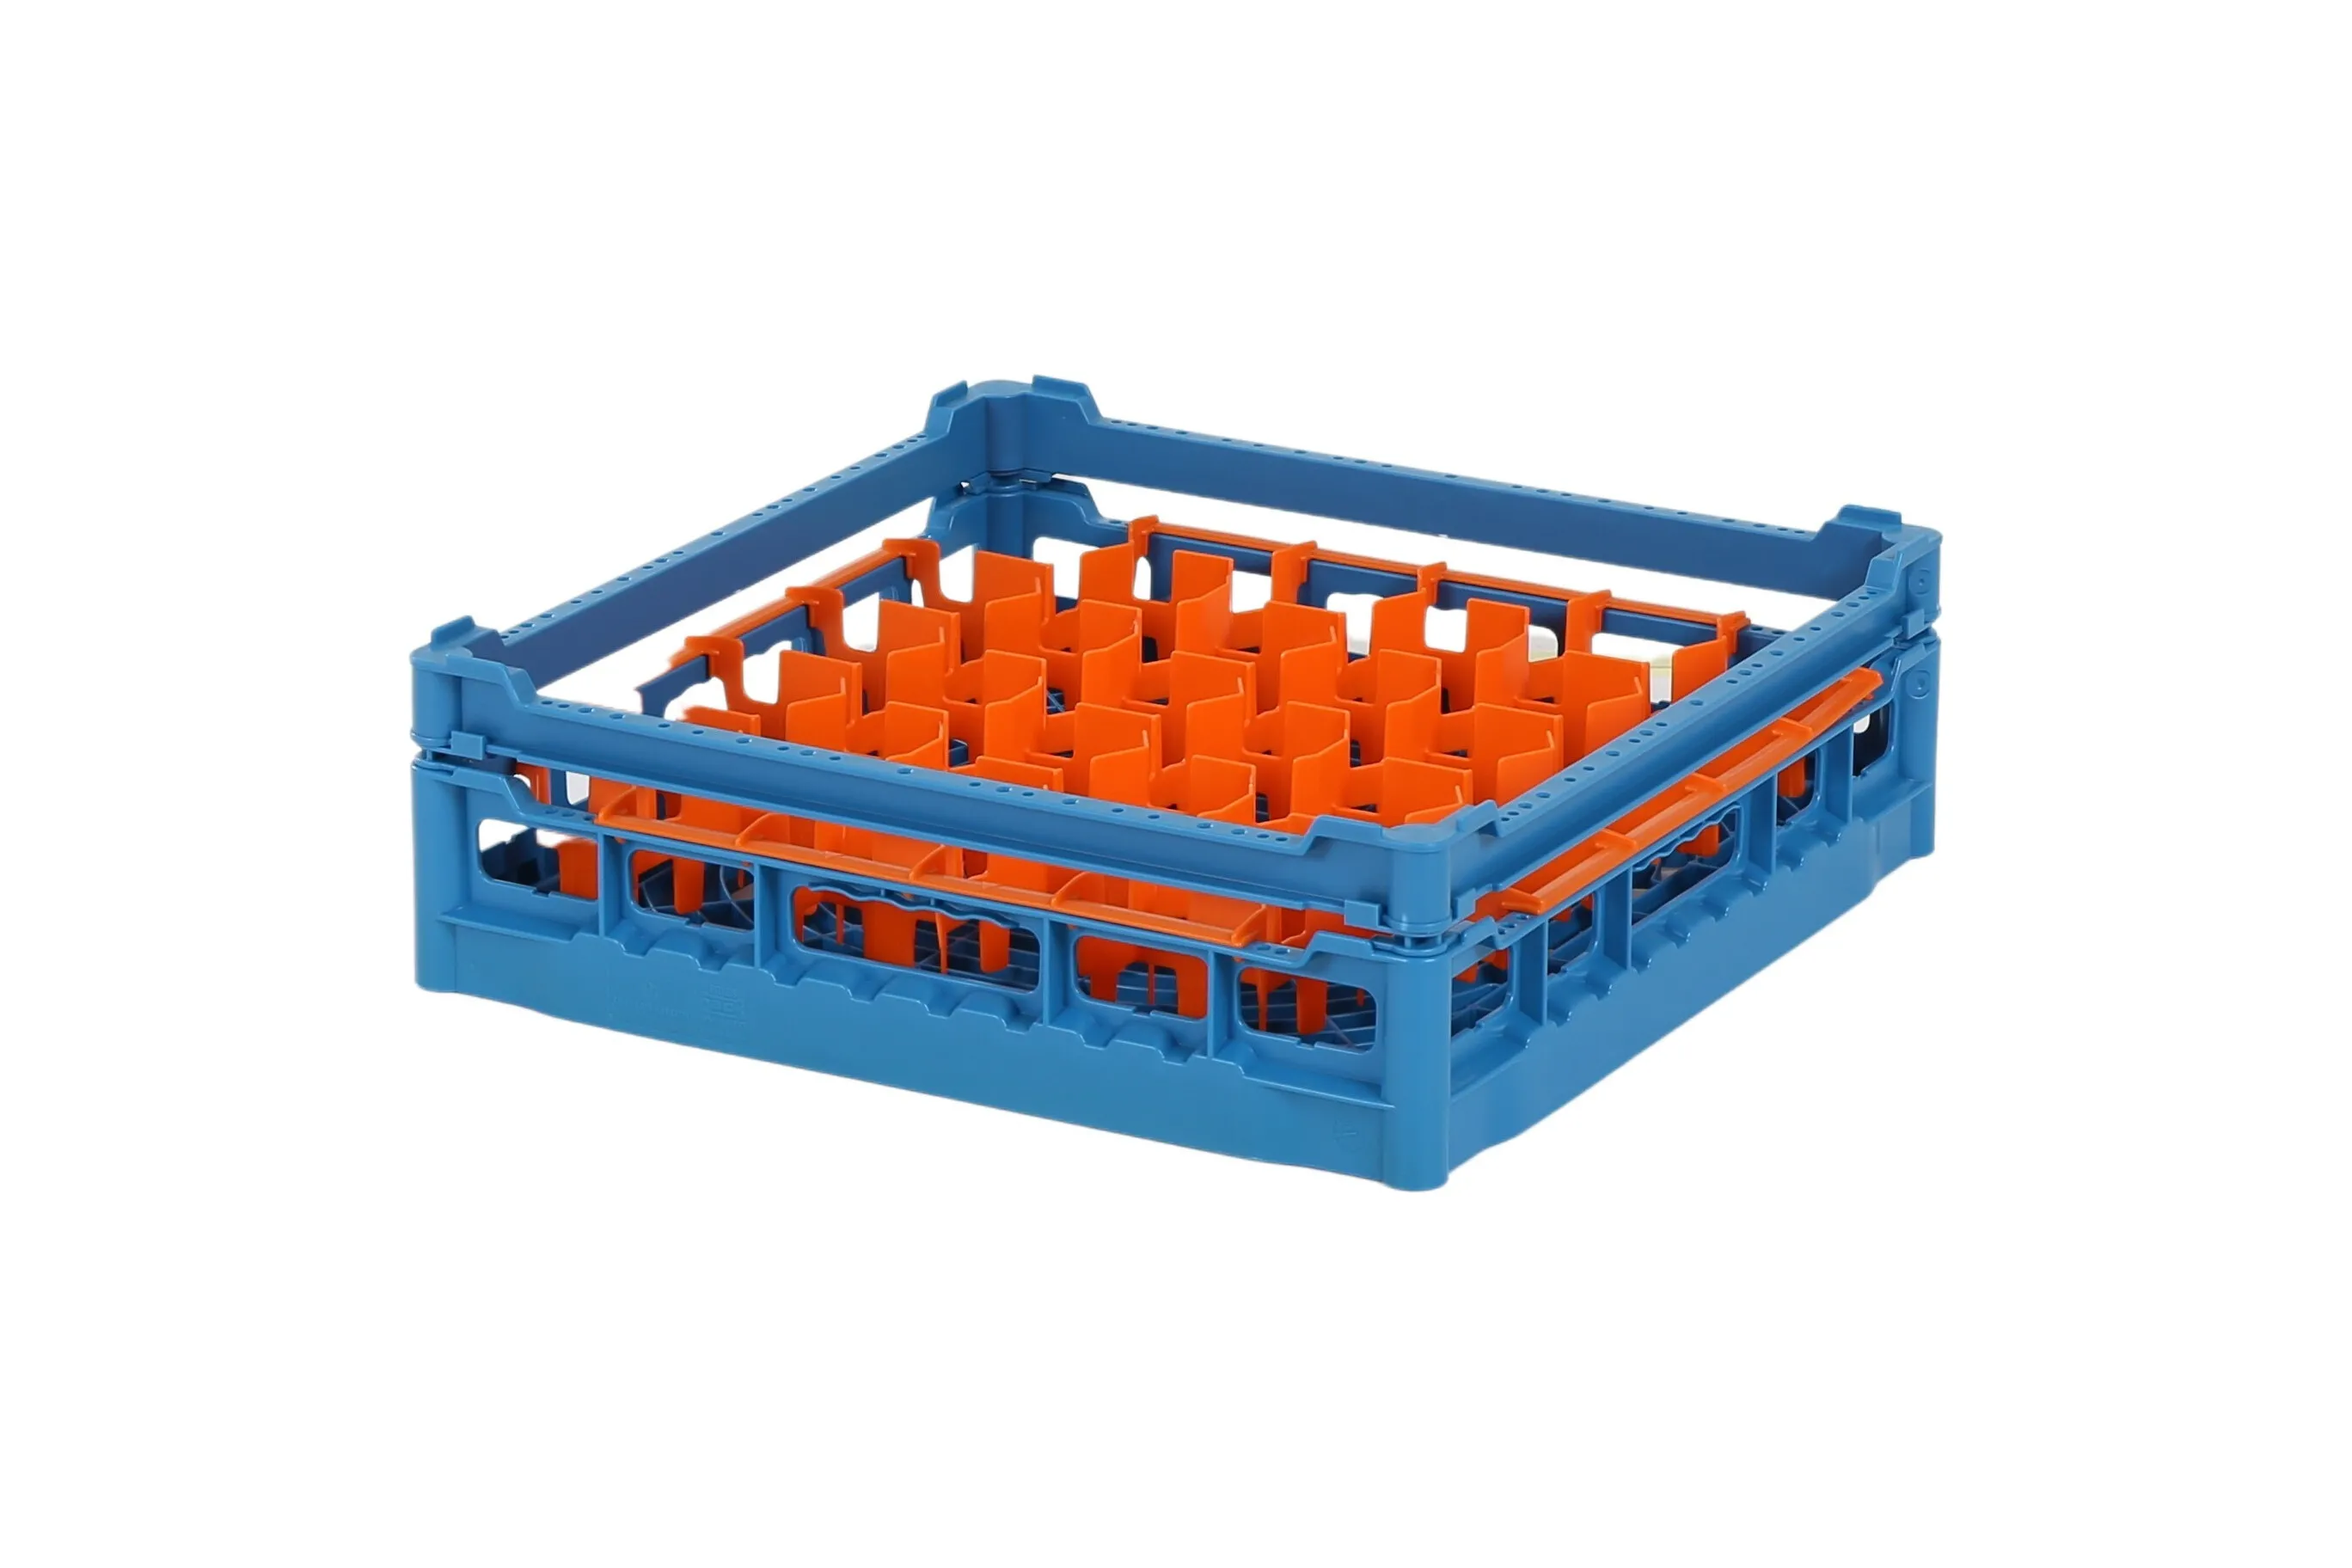 Glass basket 500x500mm blue - maximum glass height 110 mm - with orange 30-compartment division - maximum glass Ø 81mm